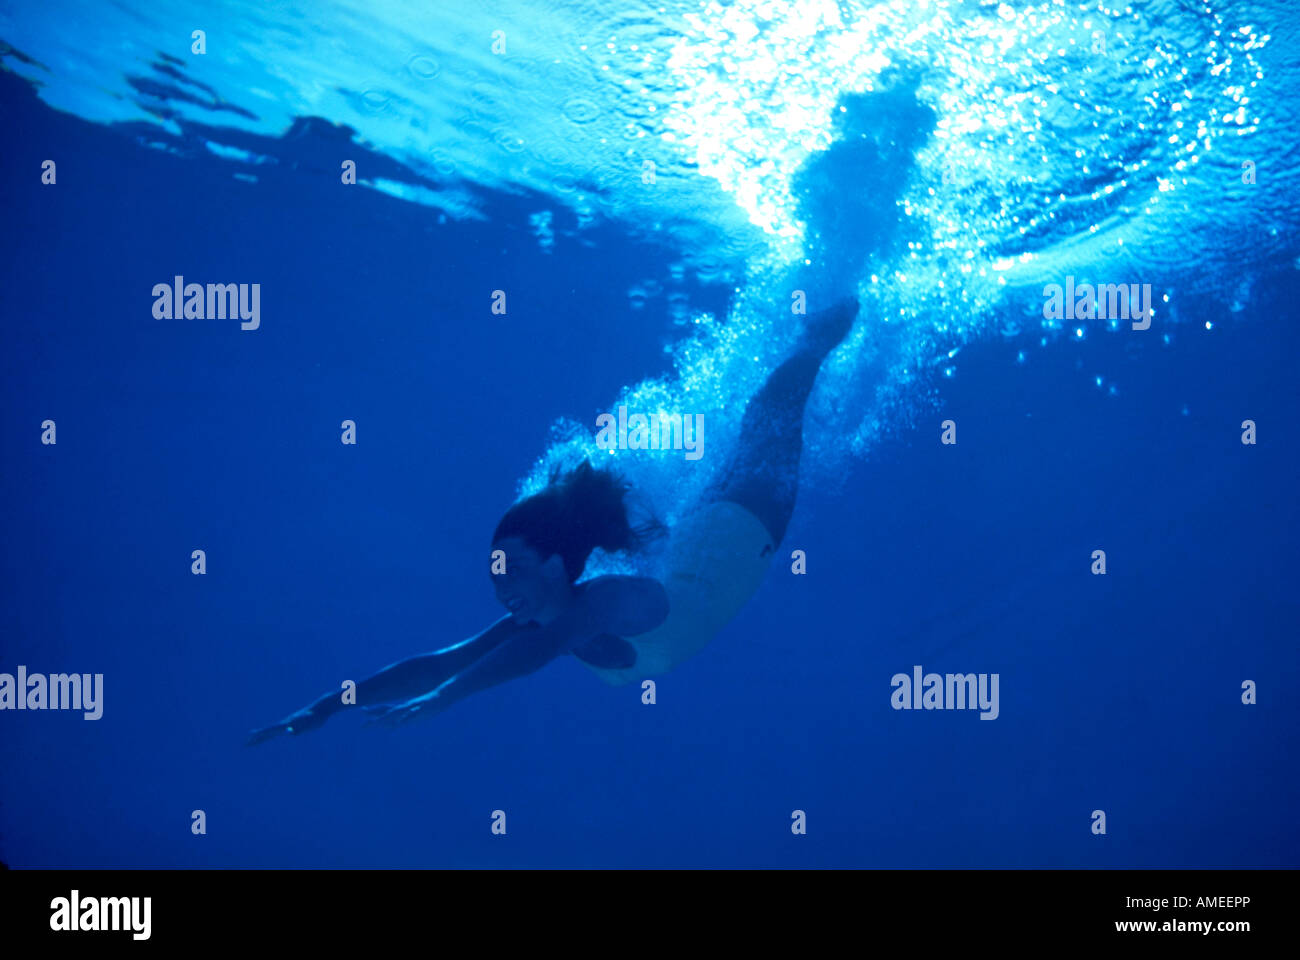 girl diving underwater in cloud of bubbles Stock Photo